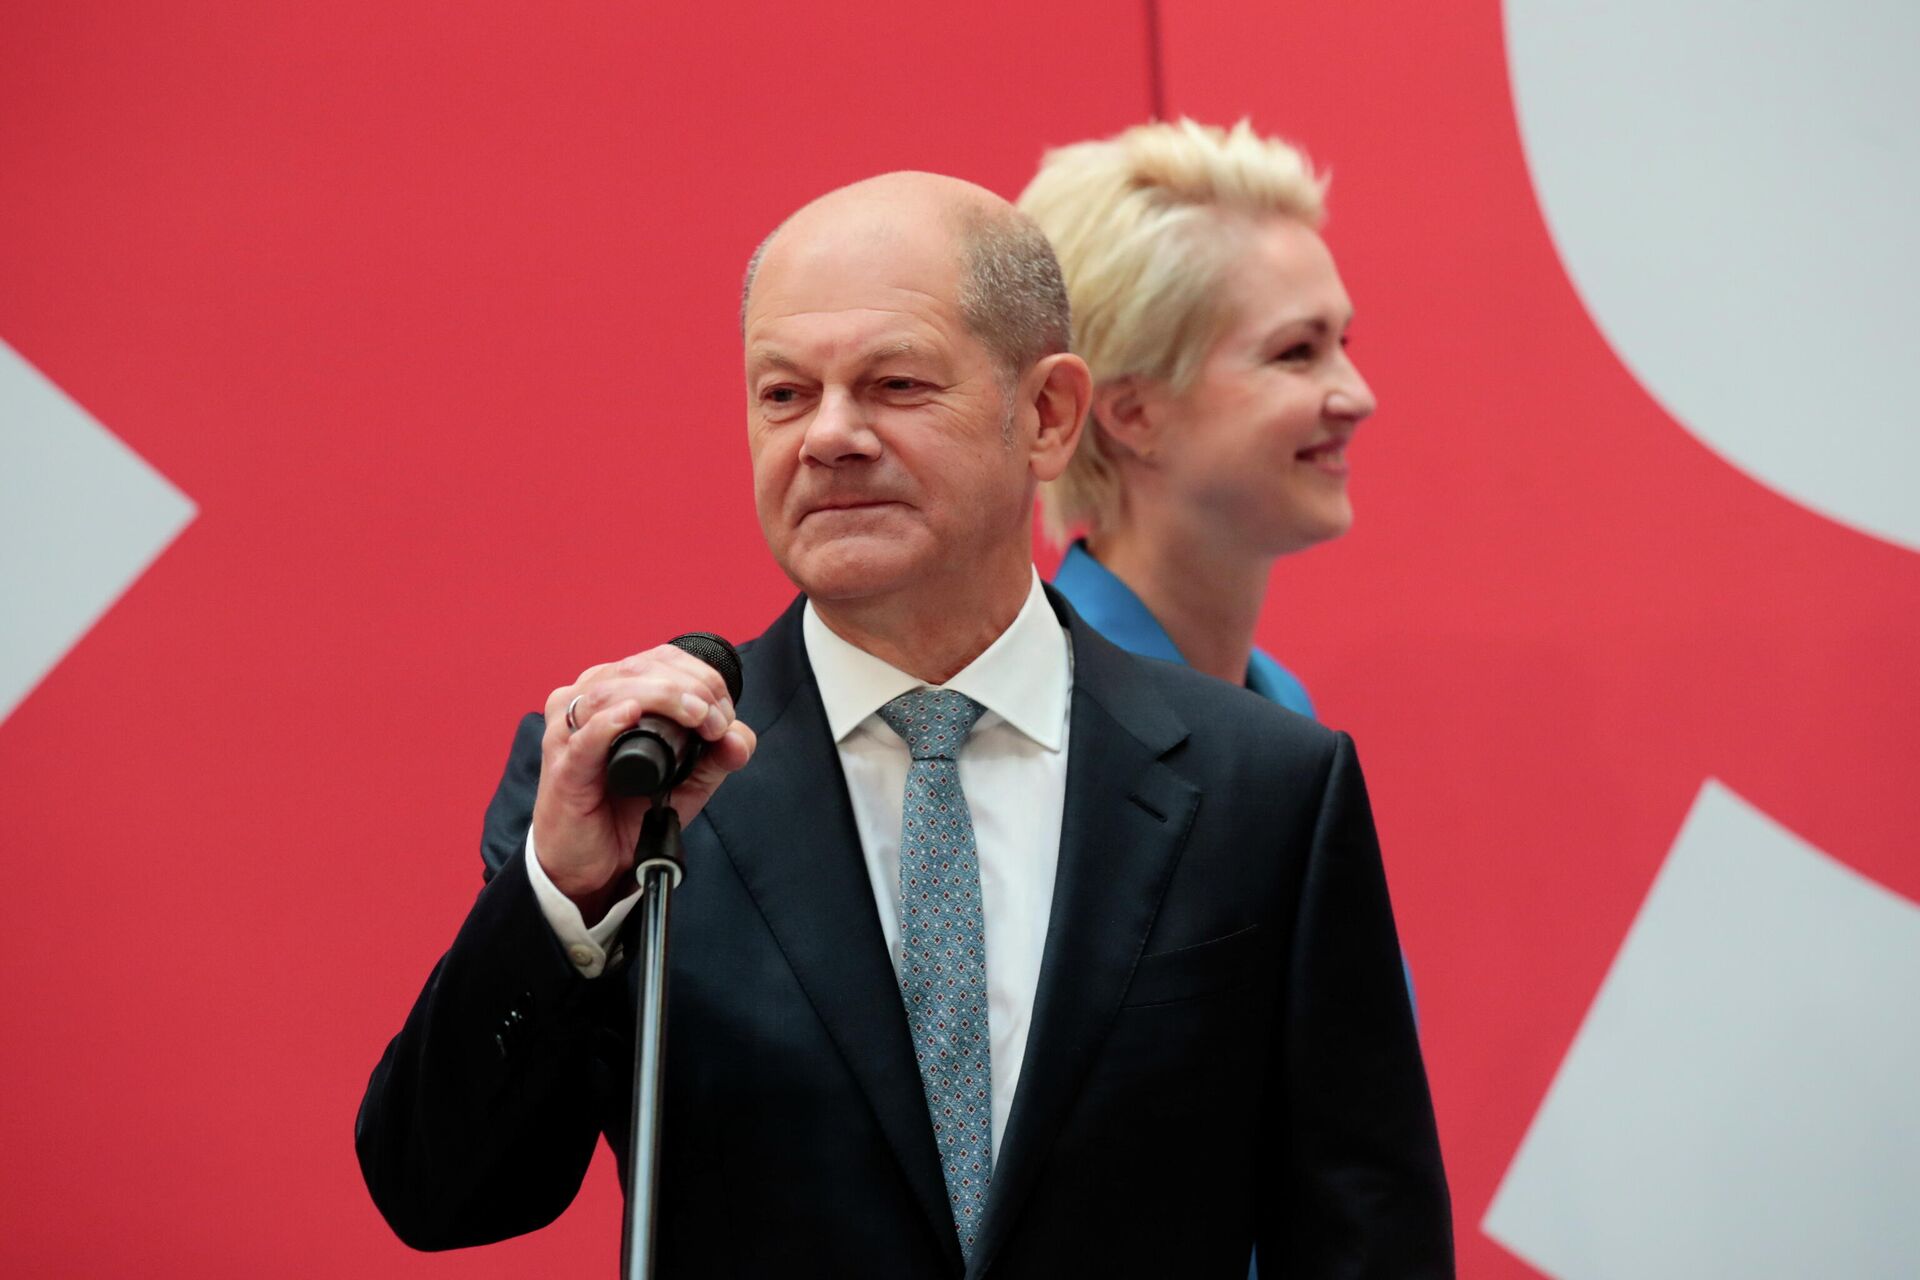 Social Democratic Party (SPD) leader and top candidate for chancellor Olaf Scholz holds a microphone as Mecklenburg-Western Pomerania state Prime Minister Manuela Schwesig walks behind him, one day after the general elections in Berlin, Germany - Sputnik International, 1920, 27.09.2021